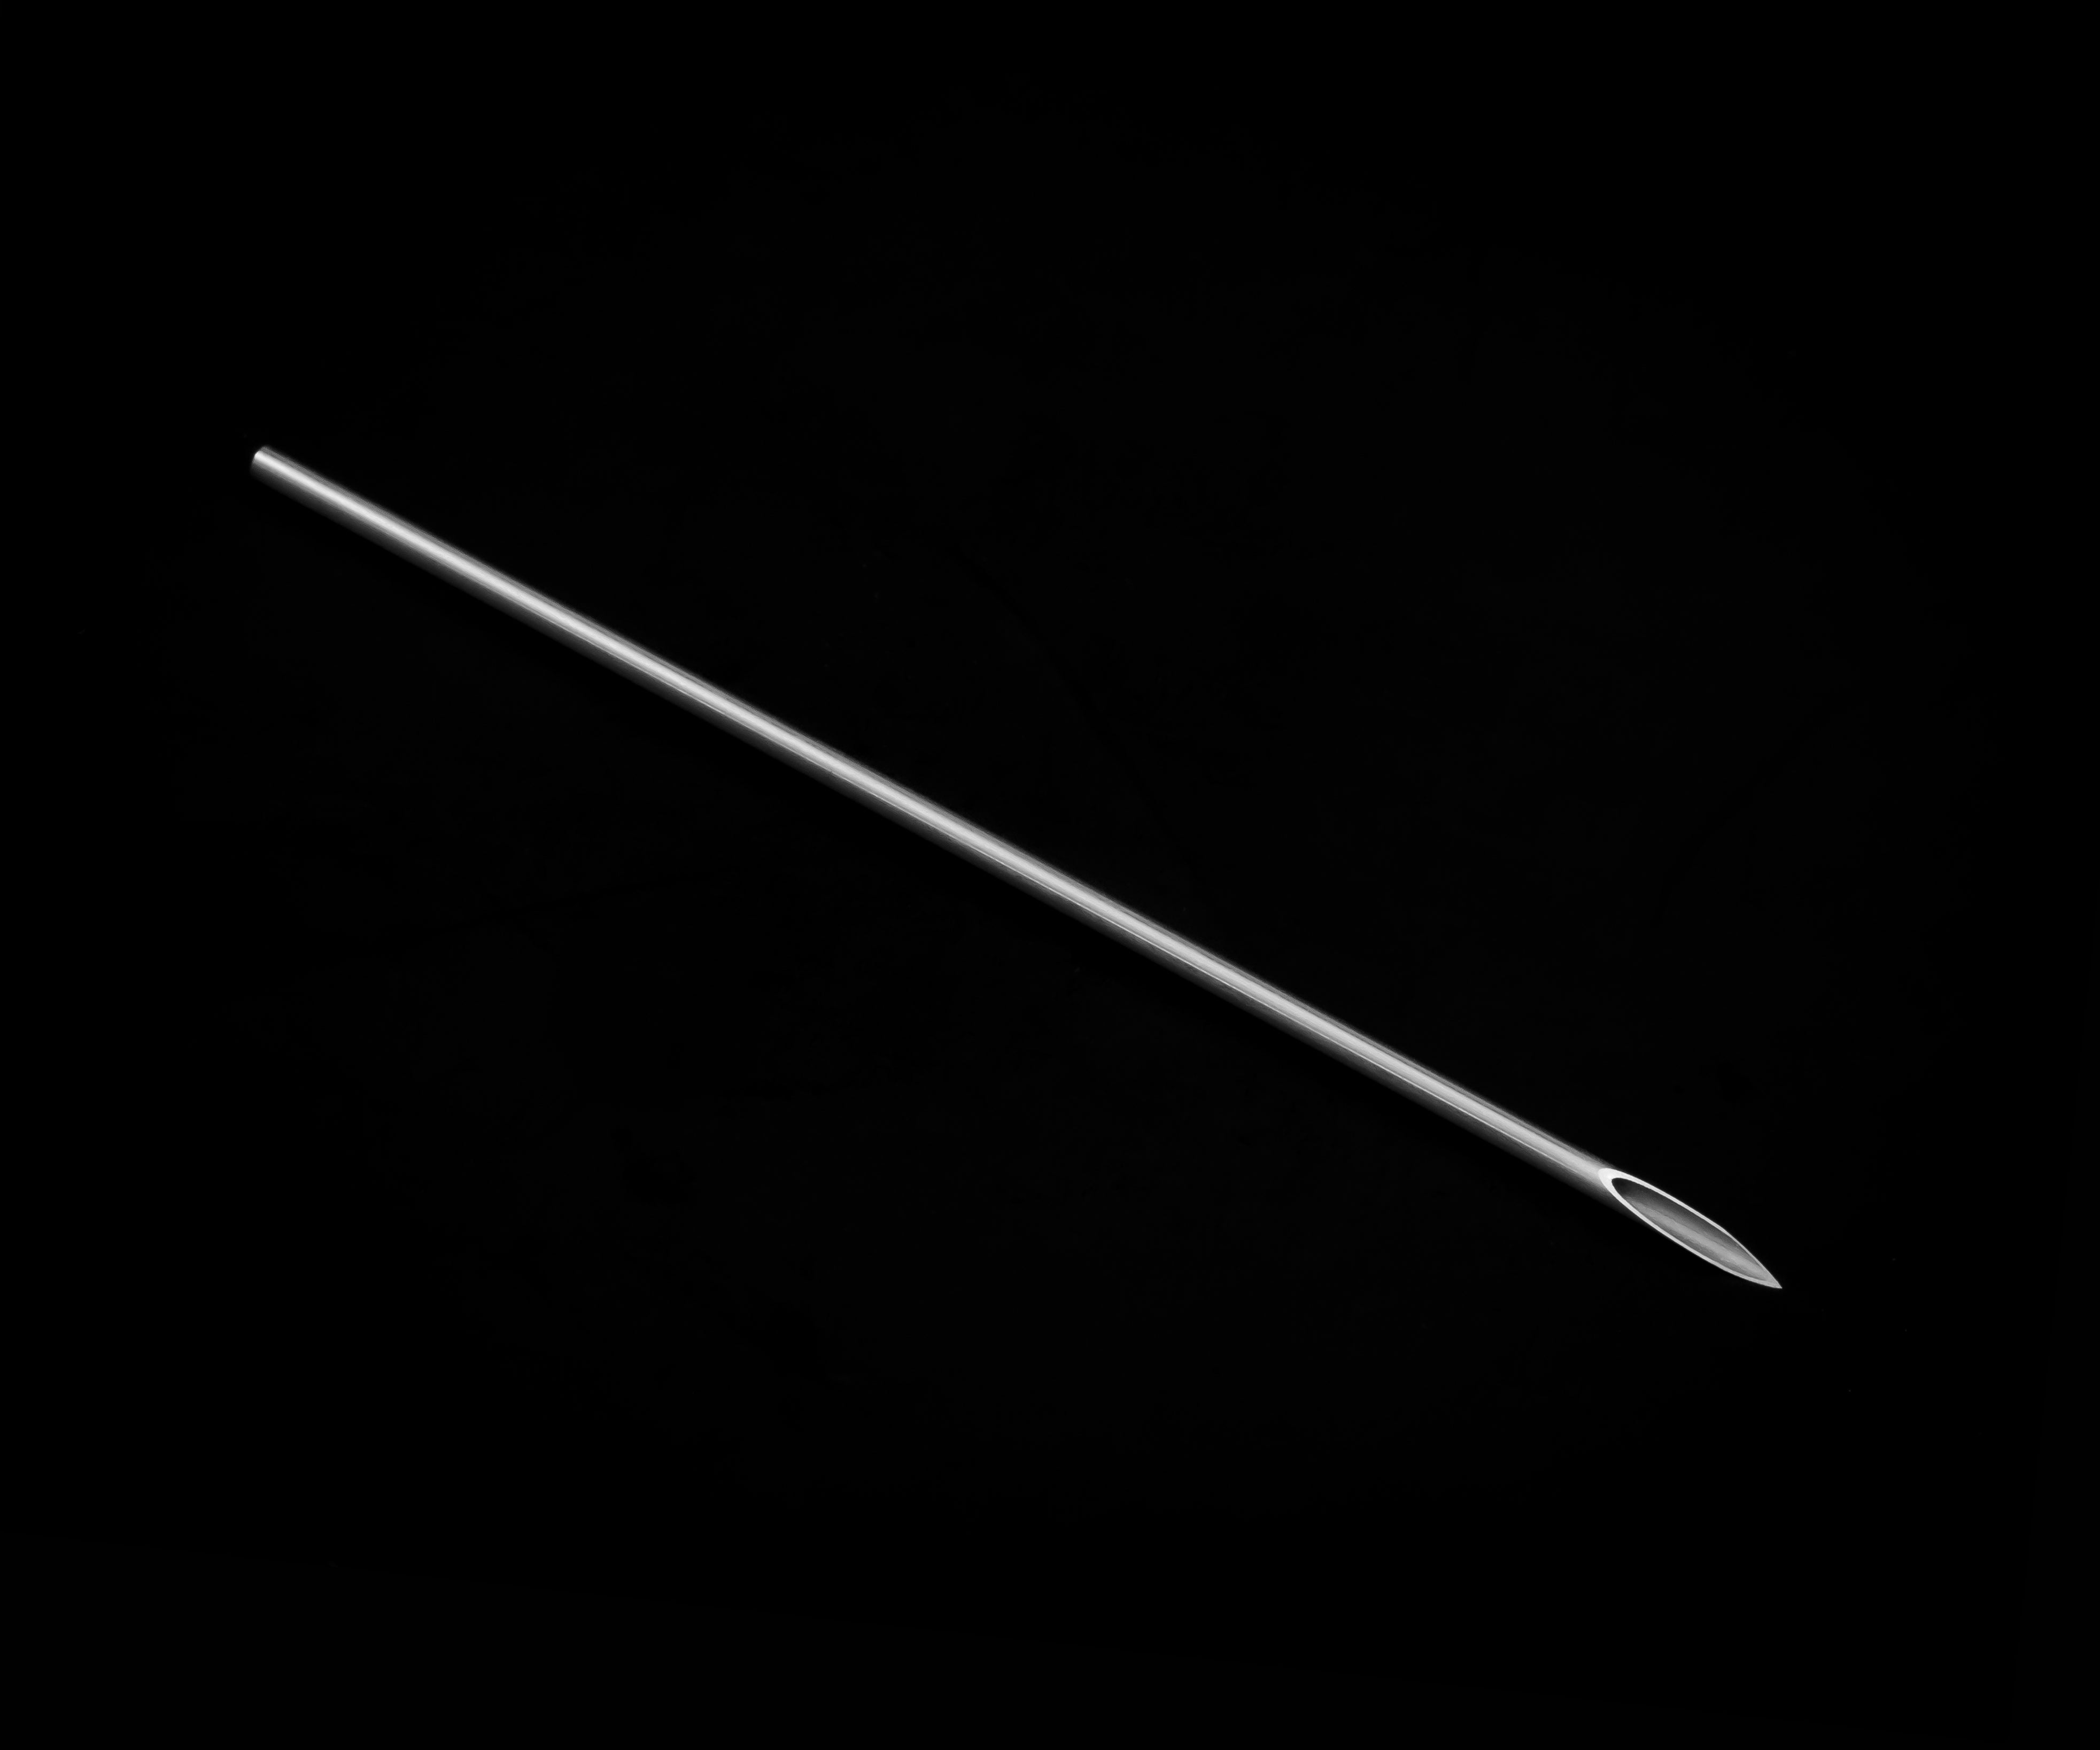 Sewing Needle 3D model